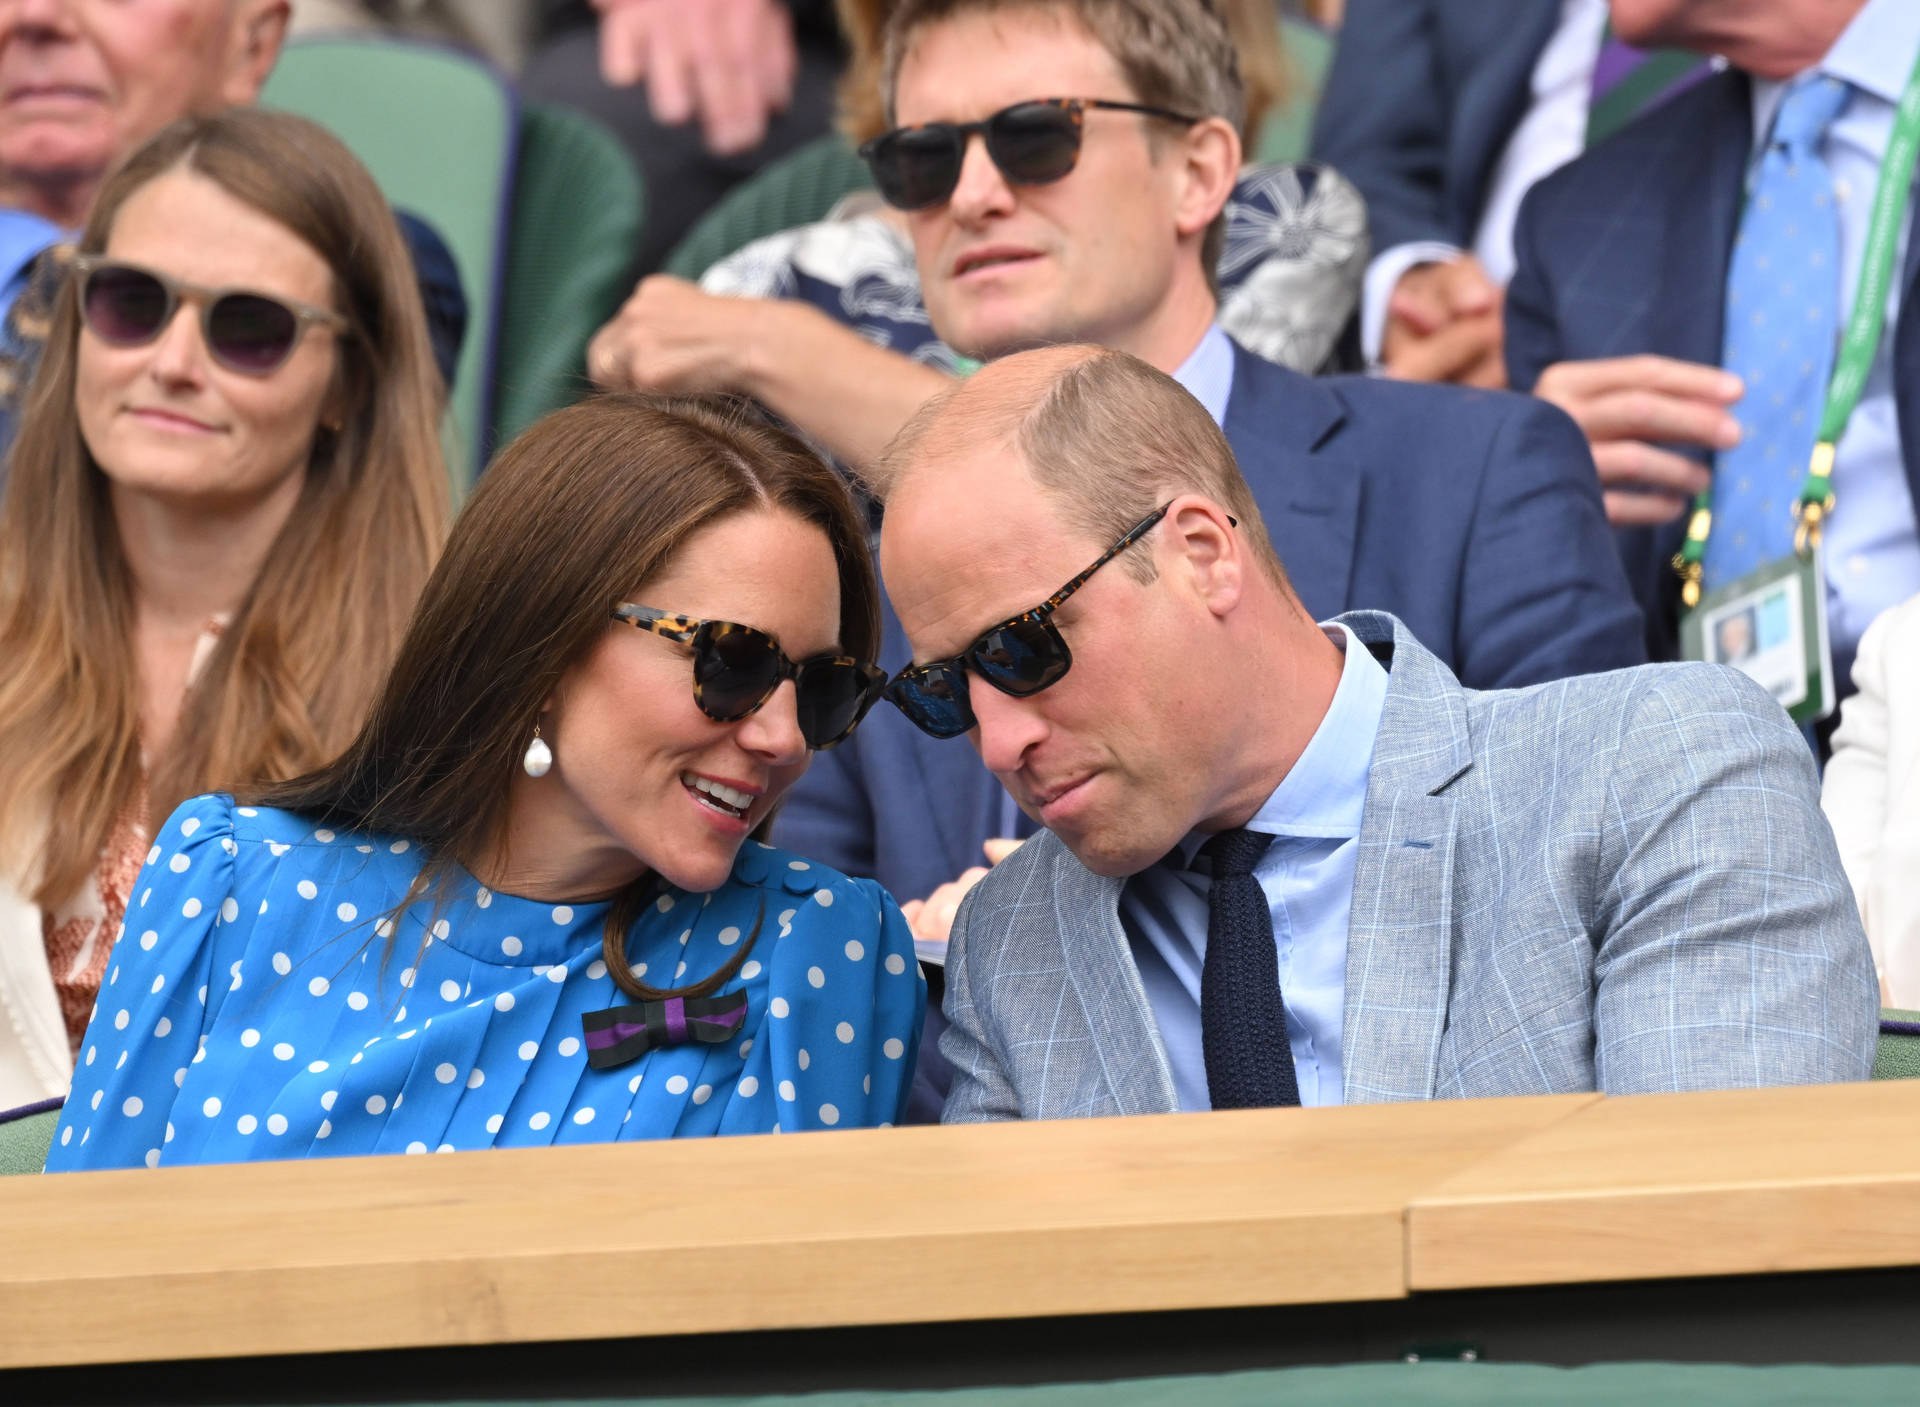 Prince William And Kate Middleton Enjoy A Sunny Day With Sunglasses On.